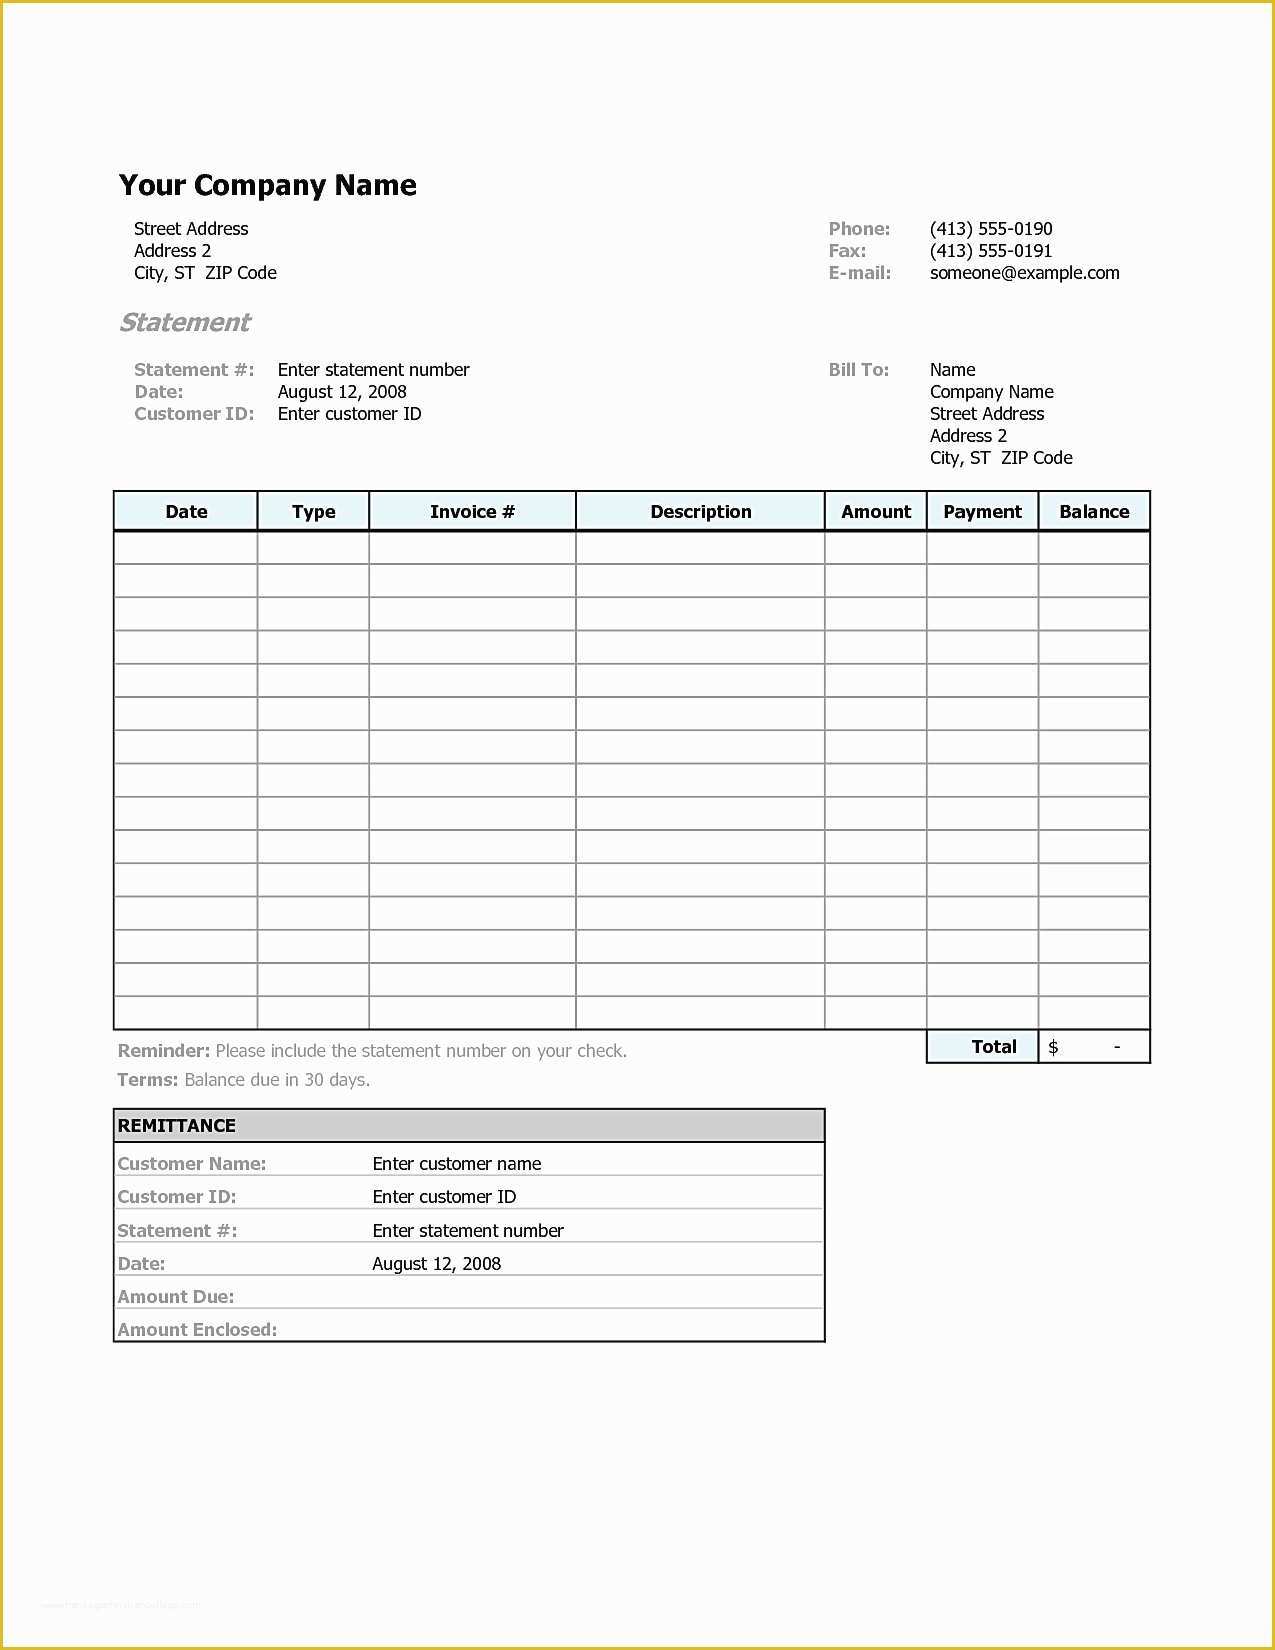 invoice generator by invoiced